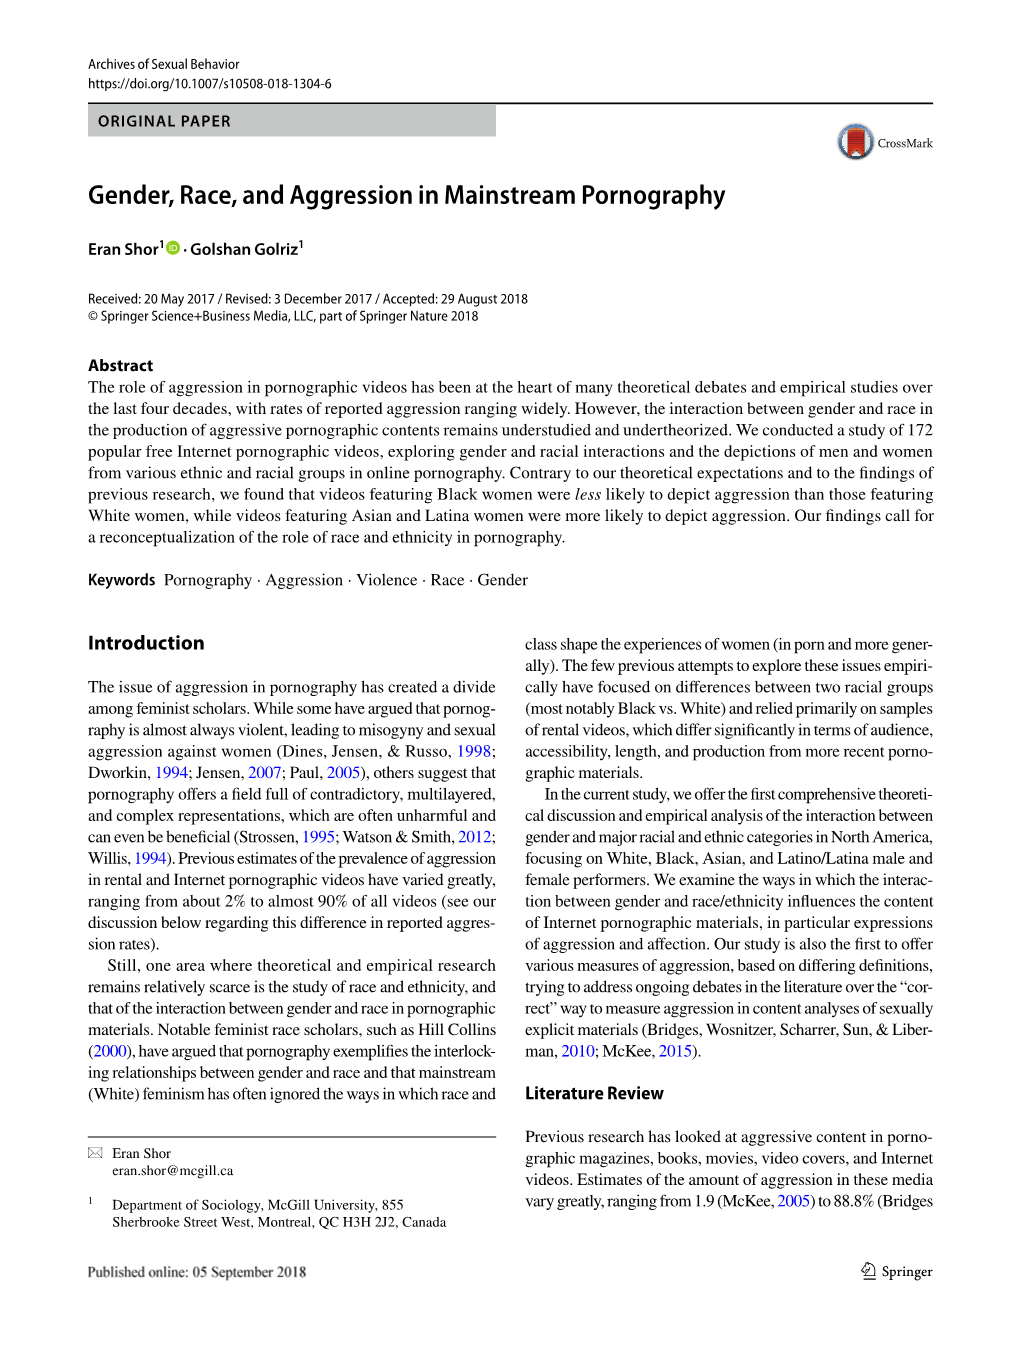 Gender, Race, and Aggression in Mainstream Pornography